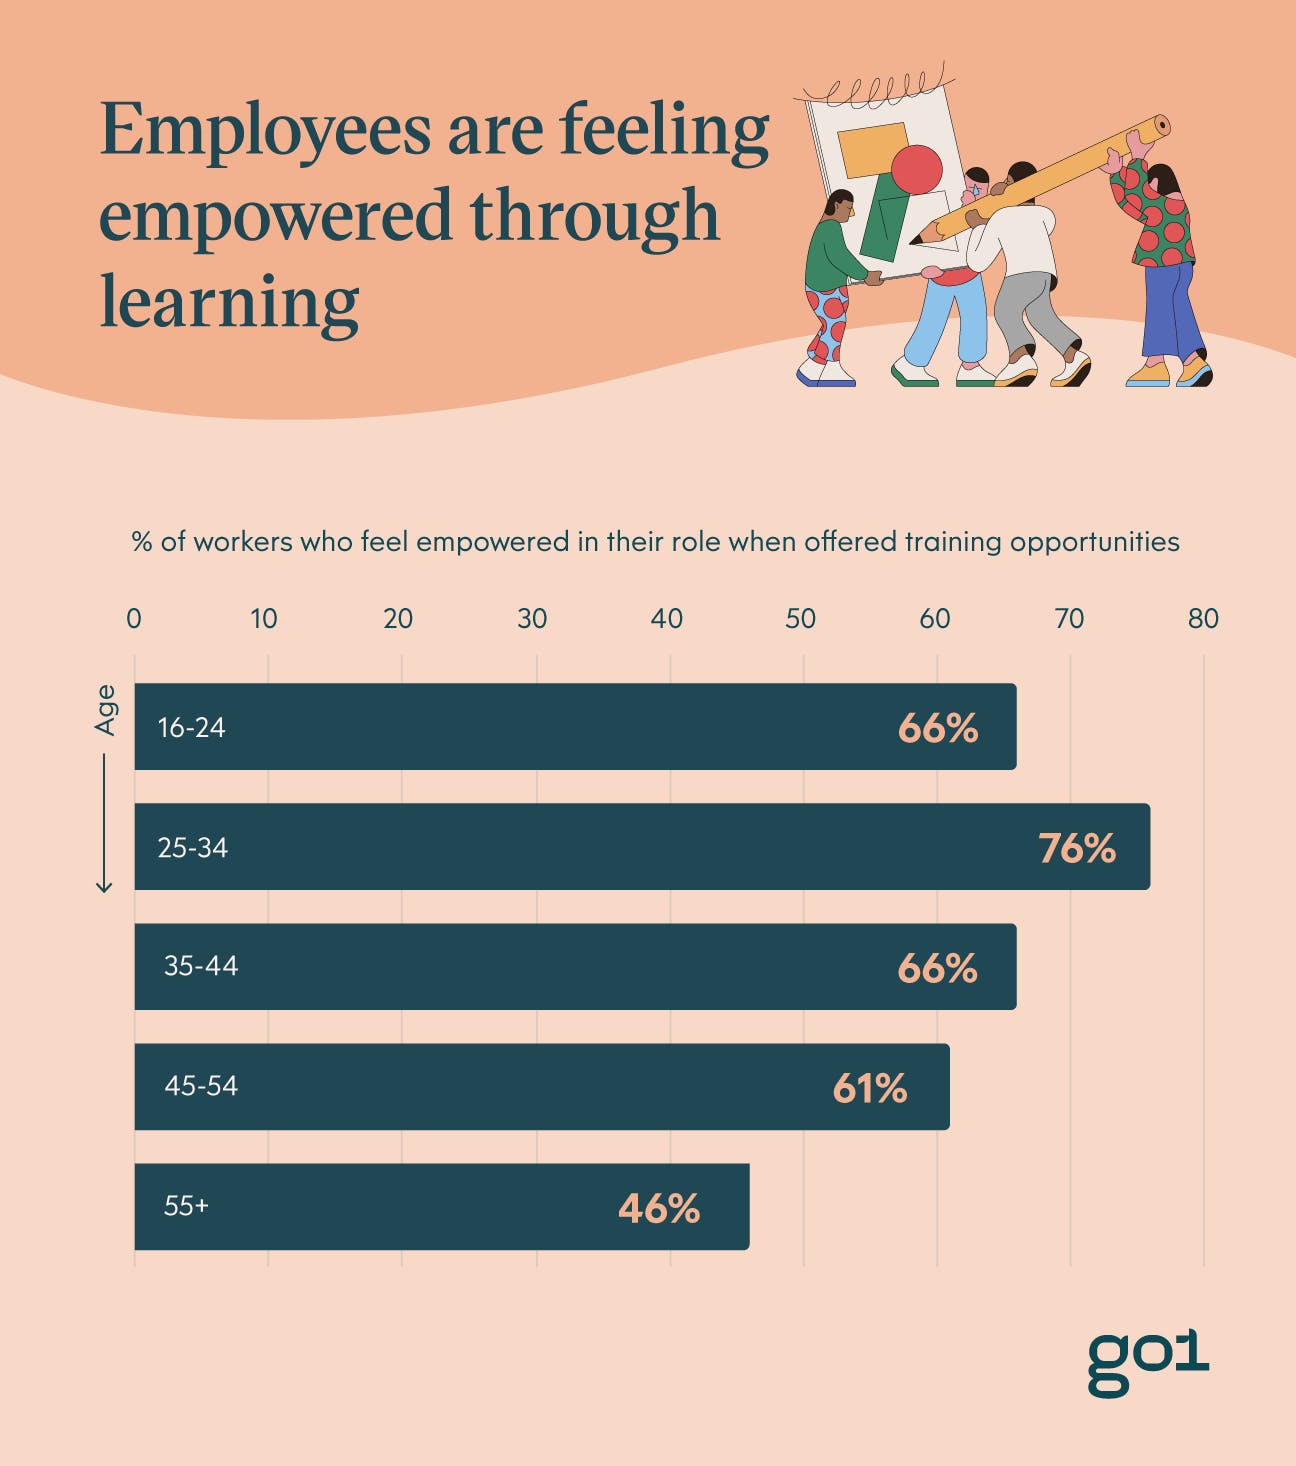 Graph displaying percentages of workers feeling empowered by learning